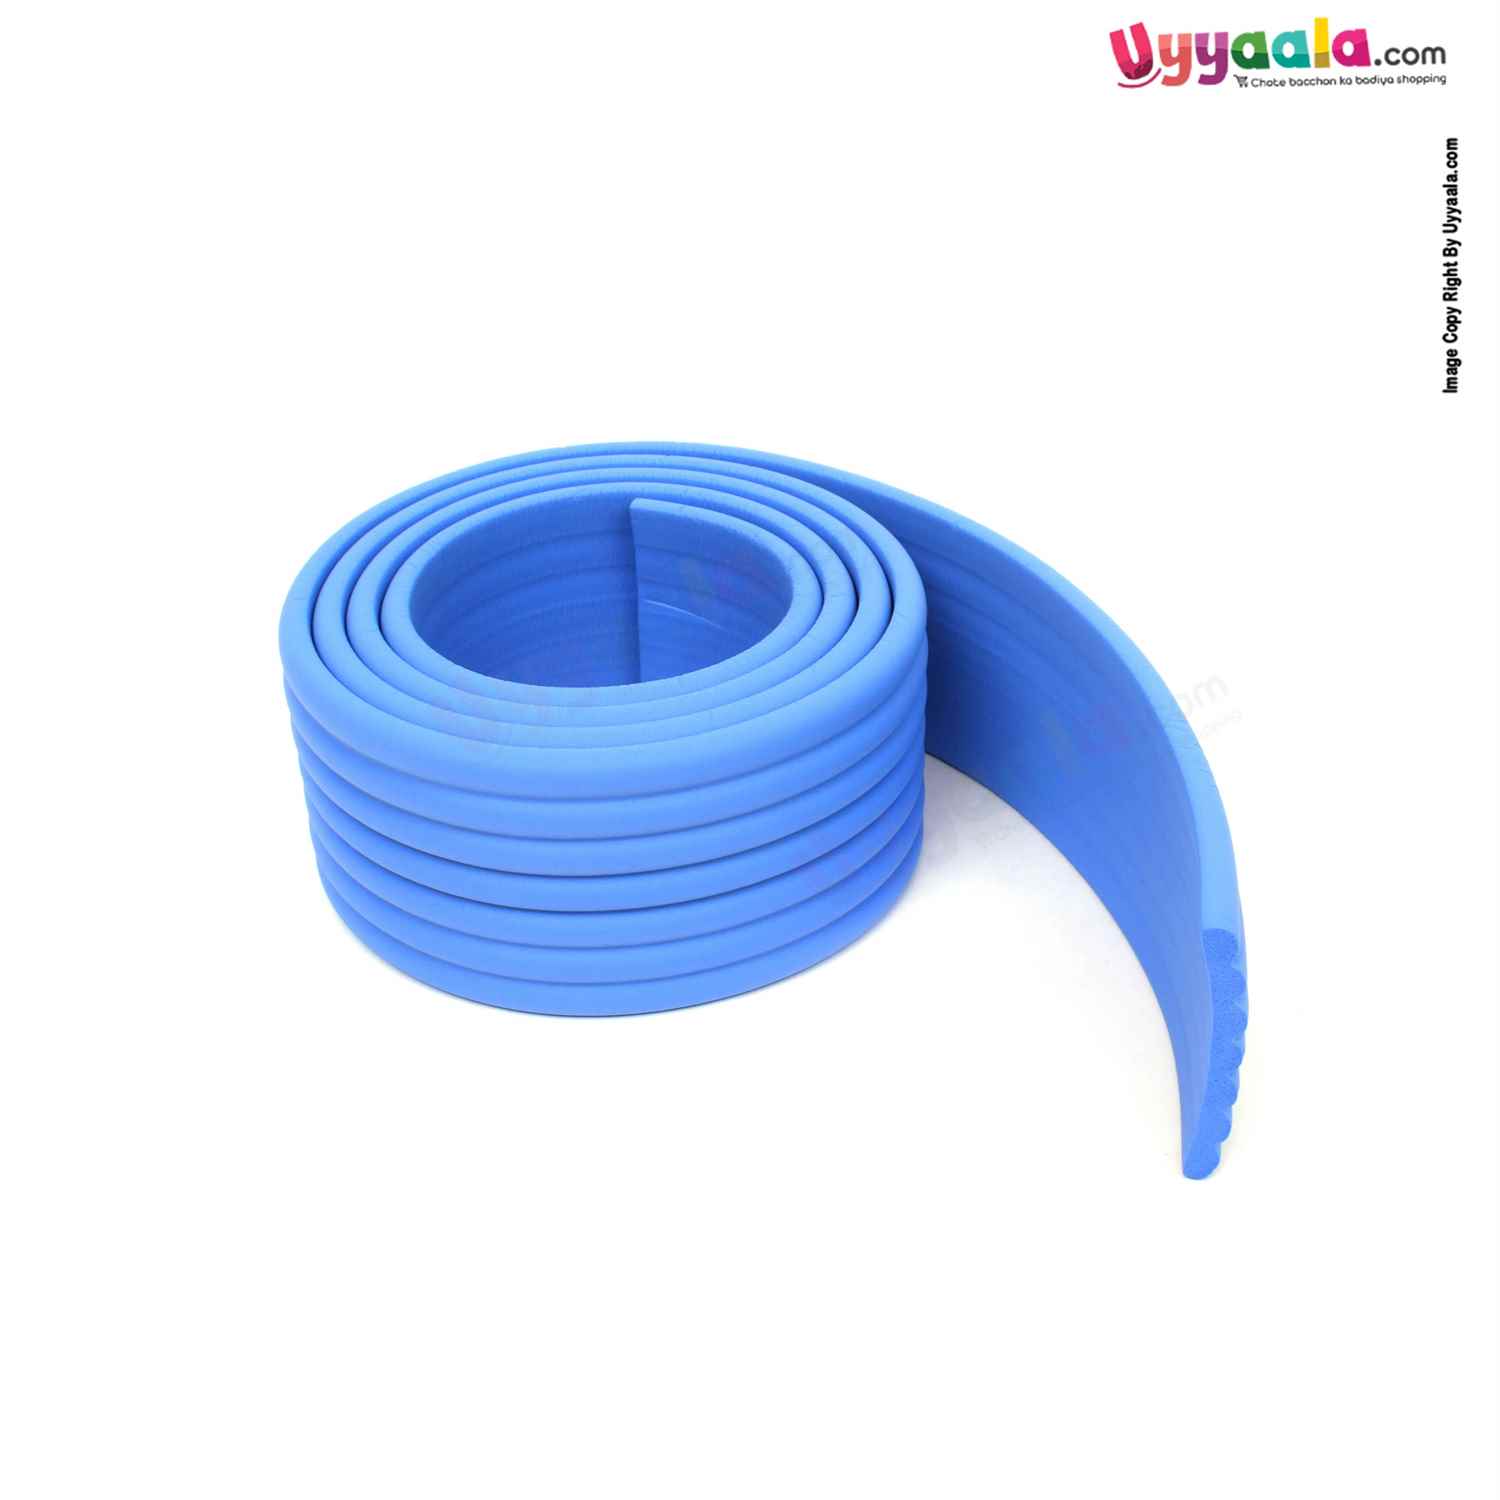 WEIKANG Safety Edge Guard for Babies 2 Meters 0+m age, Blue